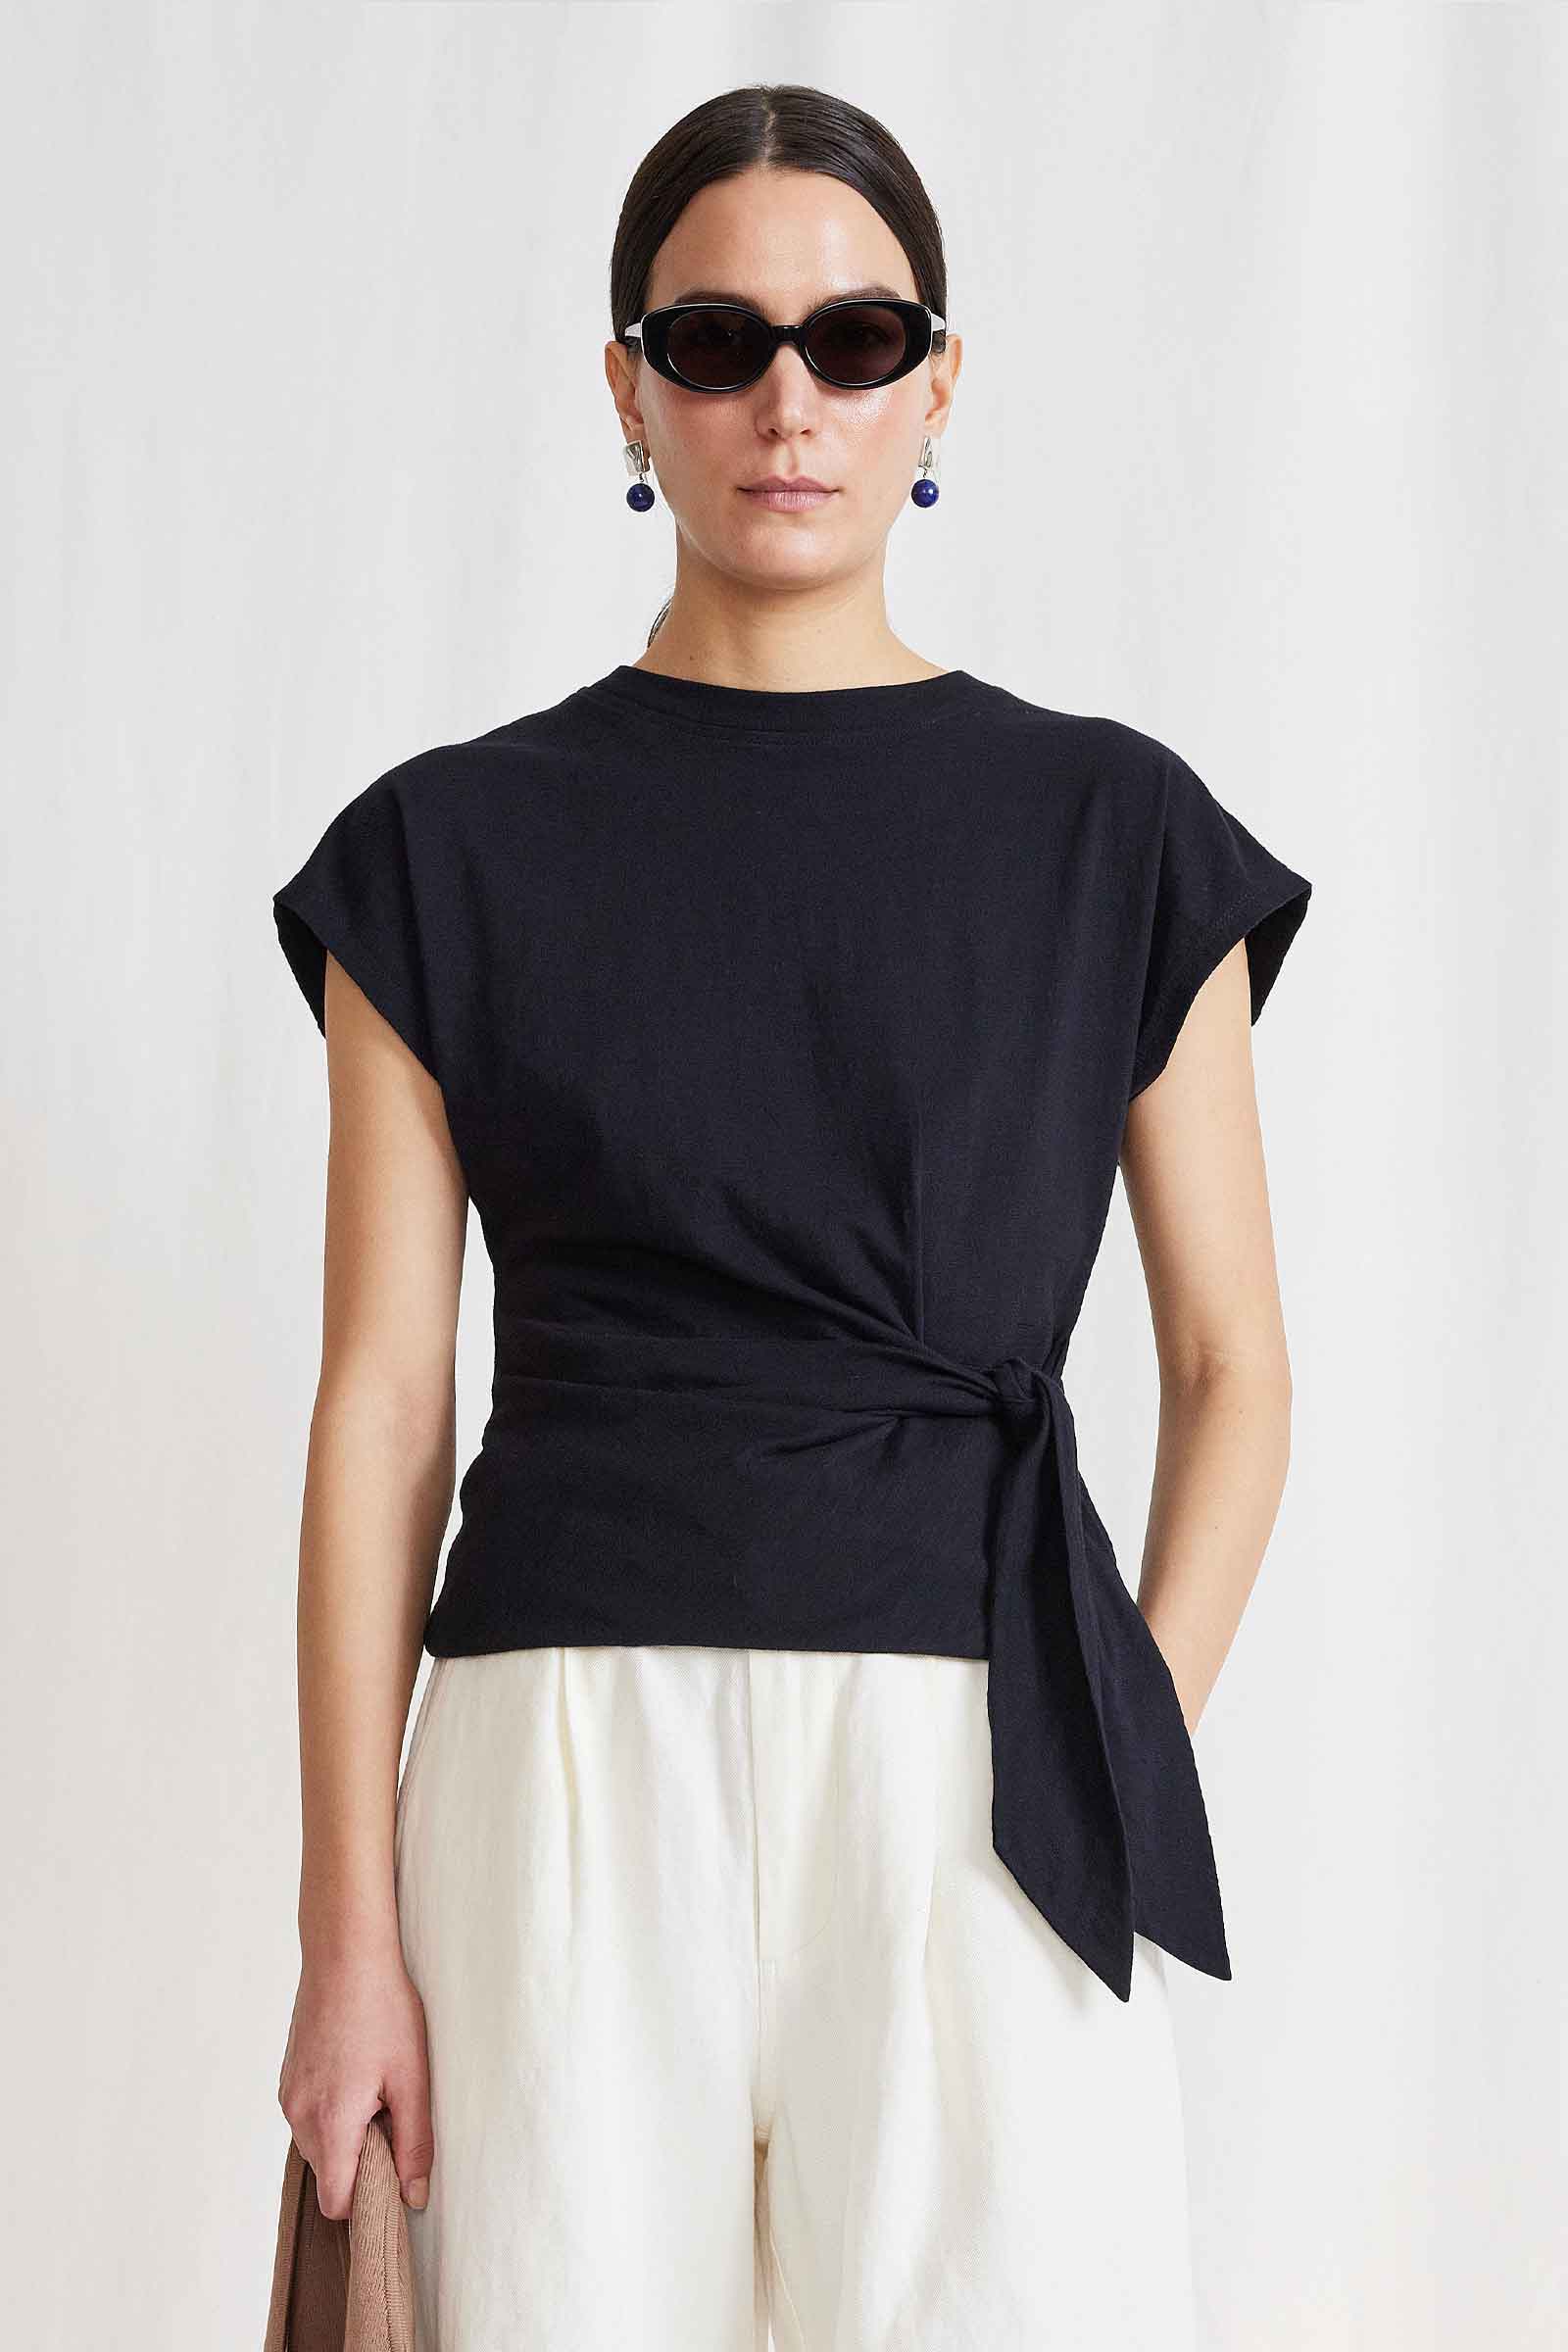 A lookbook image of a model wearing the Apiece Apart Nina Cinched Top Black.